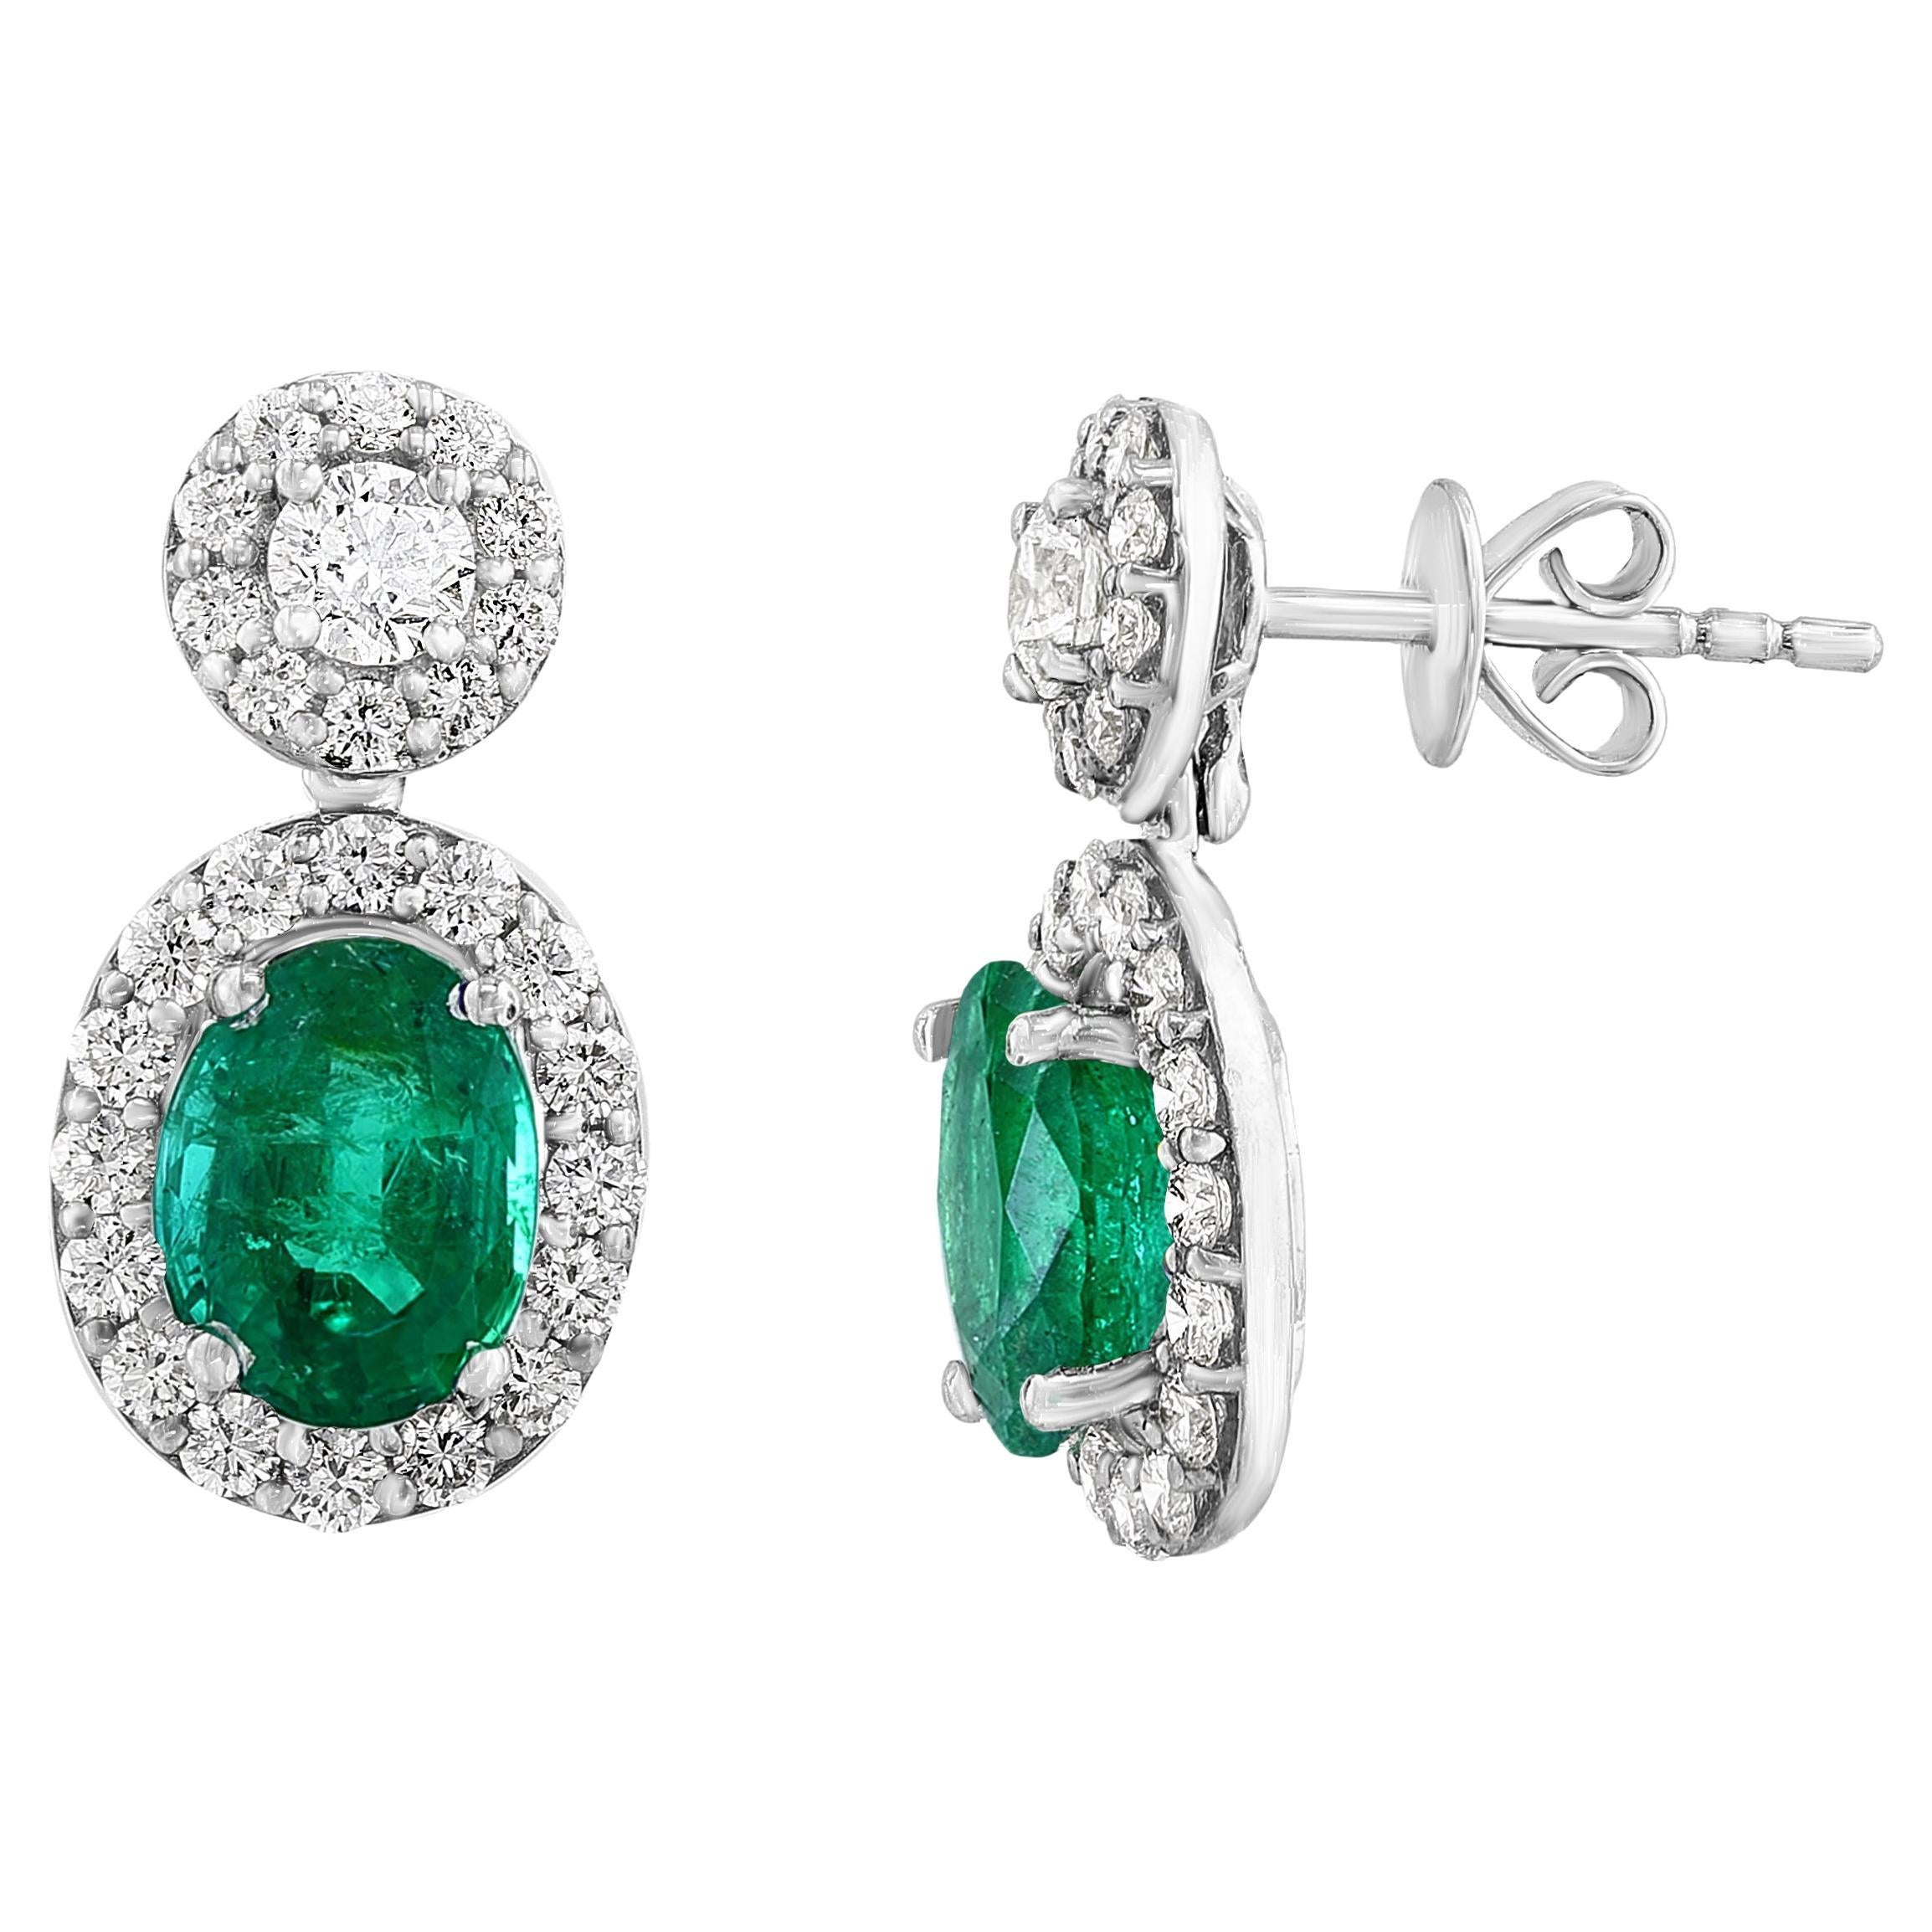 1.65 Carat of Oval cut Emerald and Diamond Drop Earrings in 18K White Gold For Sale